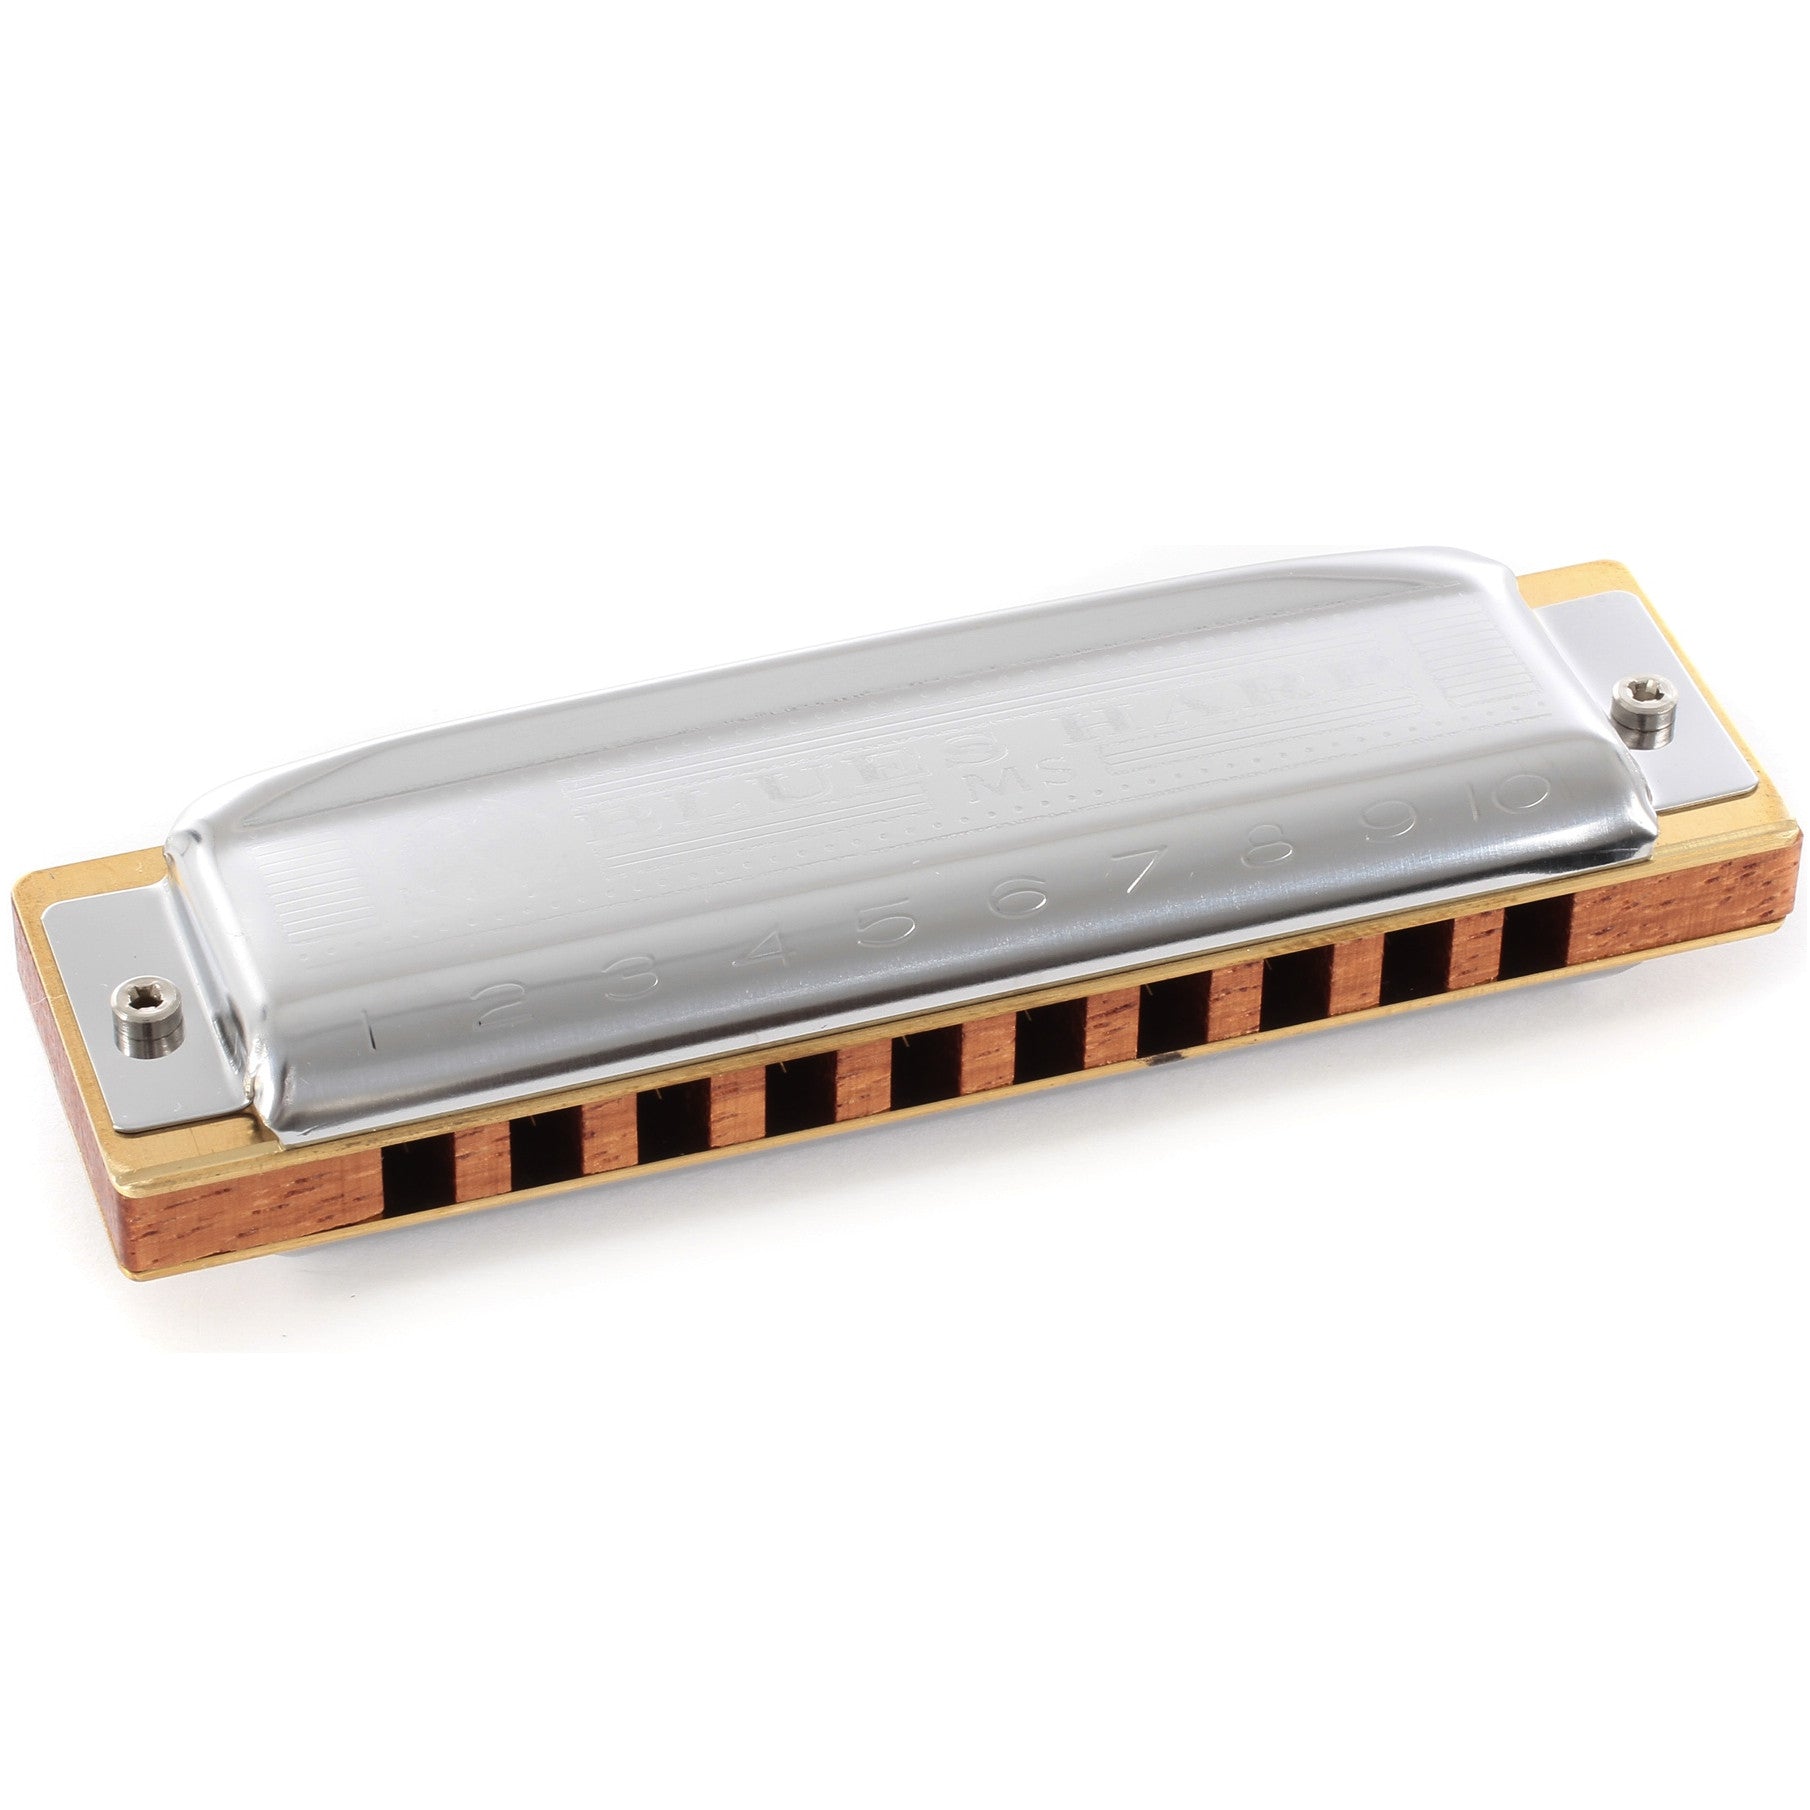 Hohner 532 Blues Harp MS-Series Harmonica in Key of D